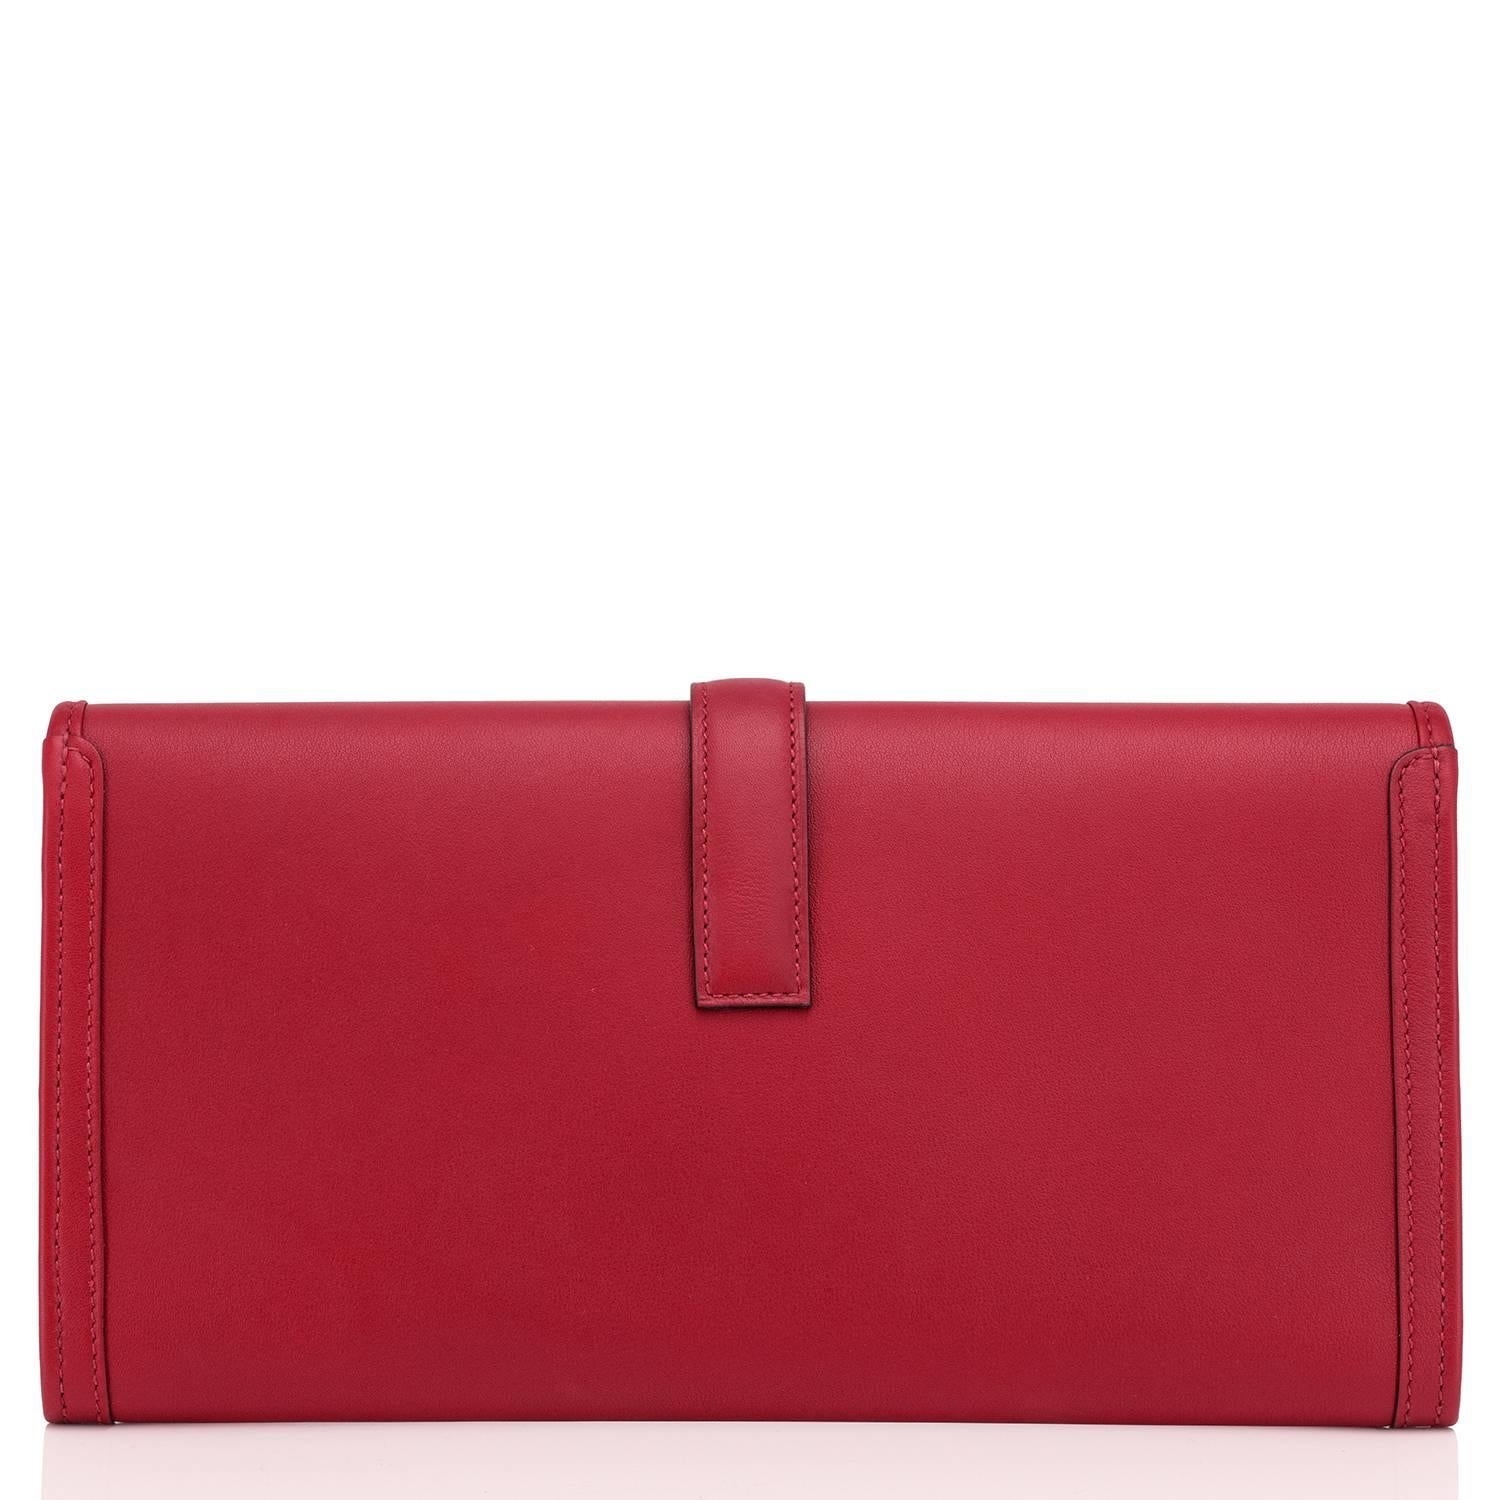 Hermes Rouge Grenat Jige Elan Clutch 29cm Red Garnet Jewel 
Brand New in Box.  Store fresh. Pristine condition.
Perfect Gift! Comes in full set with Hermes dust bag and Hermes box. 
The latest color Rouge Grenat is a must-have "Garnet"